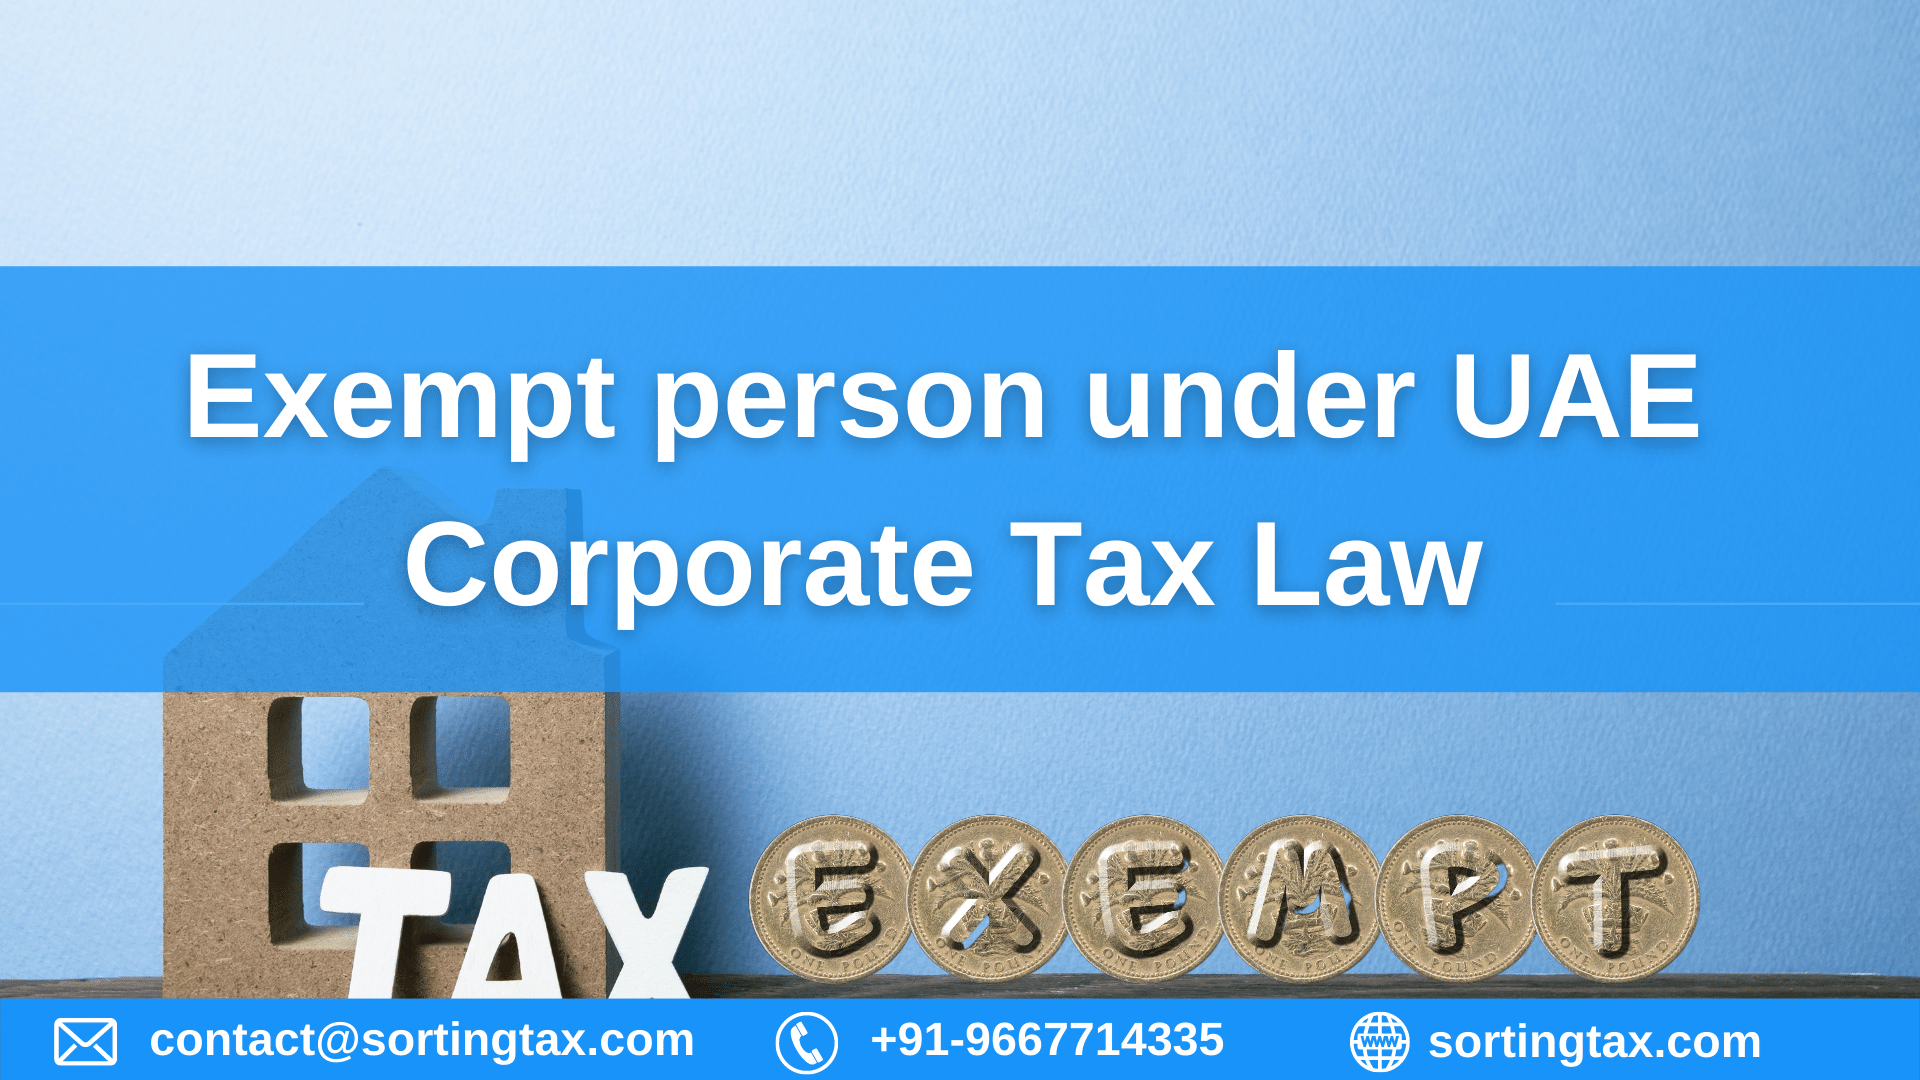 Exempt person under UAE Corporate Tax Law